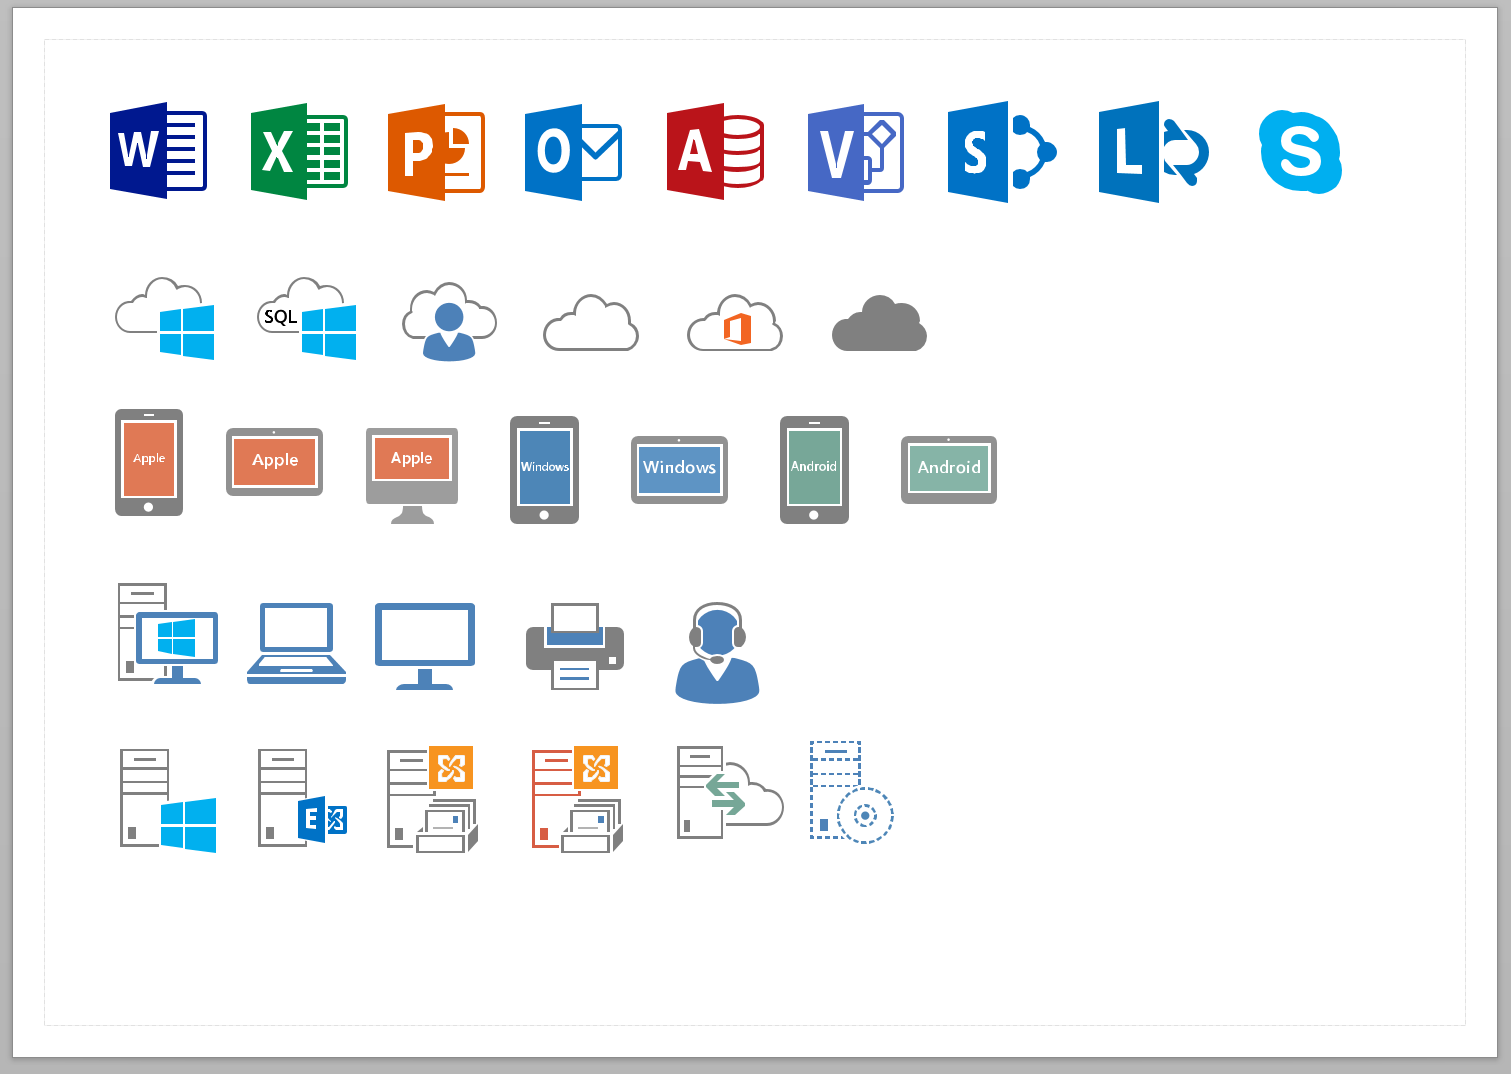 The visio stencil for SharePoint Exchange Lync and 